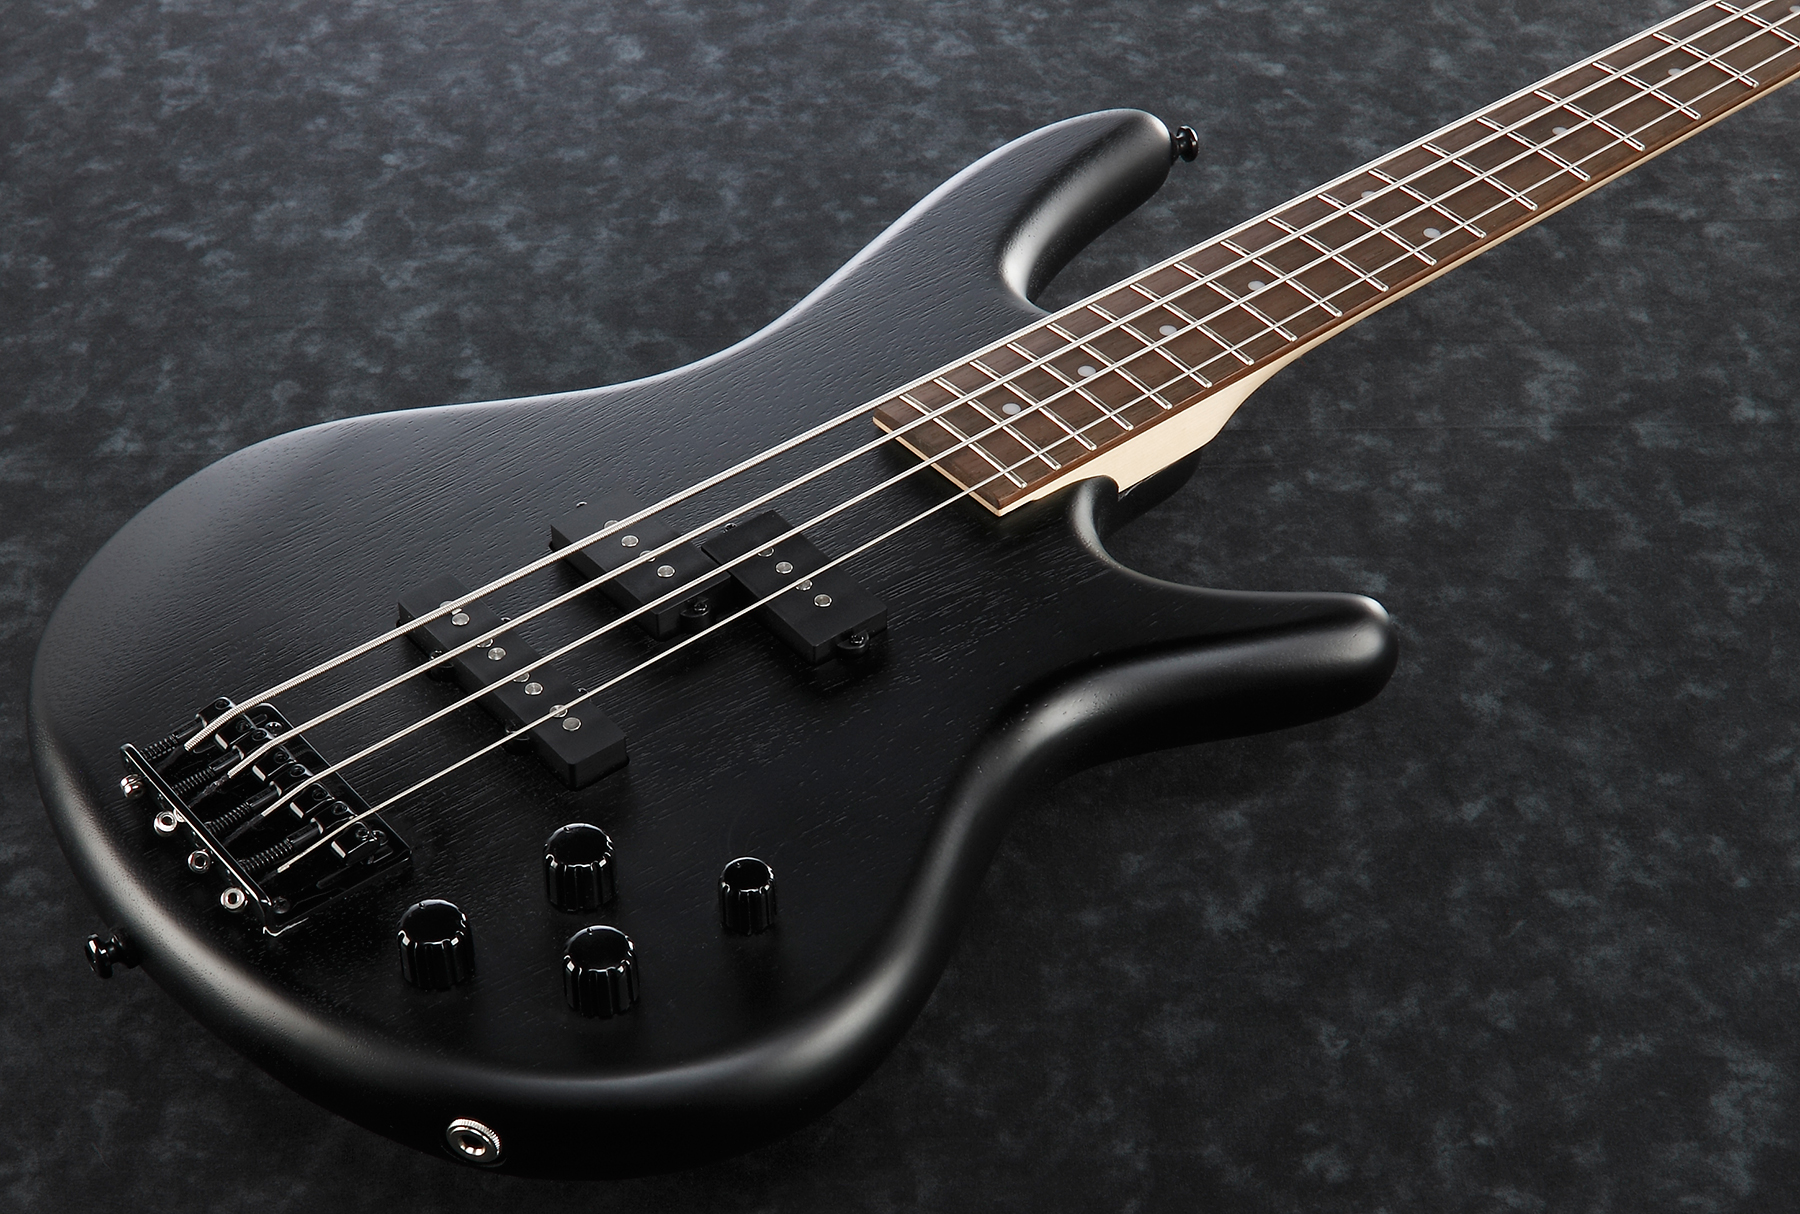 Ibanez Gsr200b Wk Gio Active Jat - Weathered Black - Solid body electric bass - Variation 1